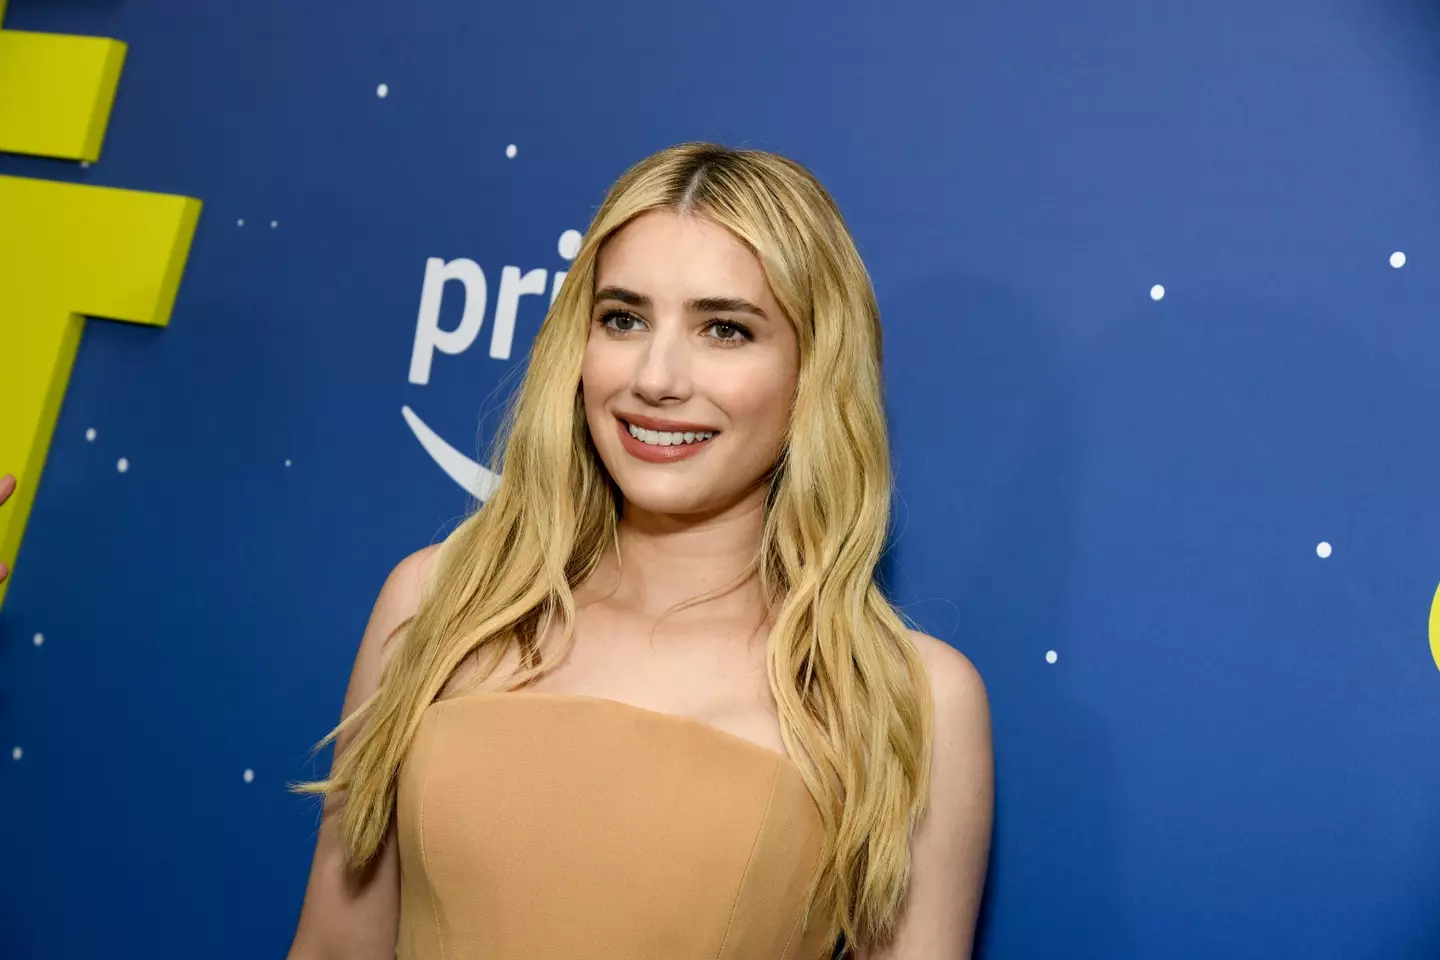 Emma Roberts starred in “American Horror Story.” (Kristina Bumphrey/Variety via Getty Images)